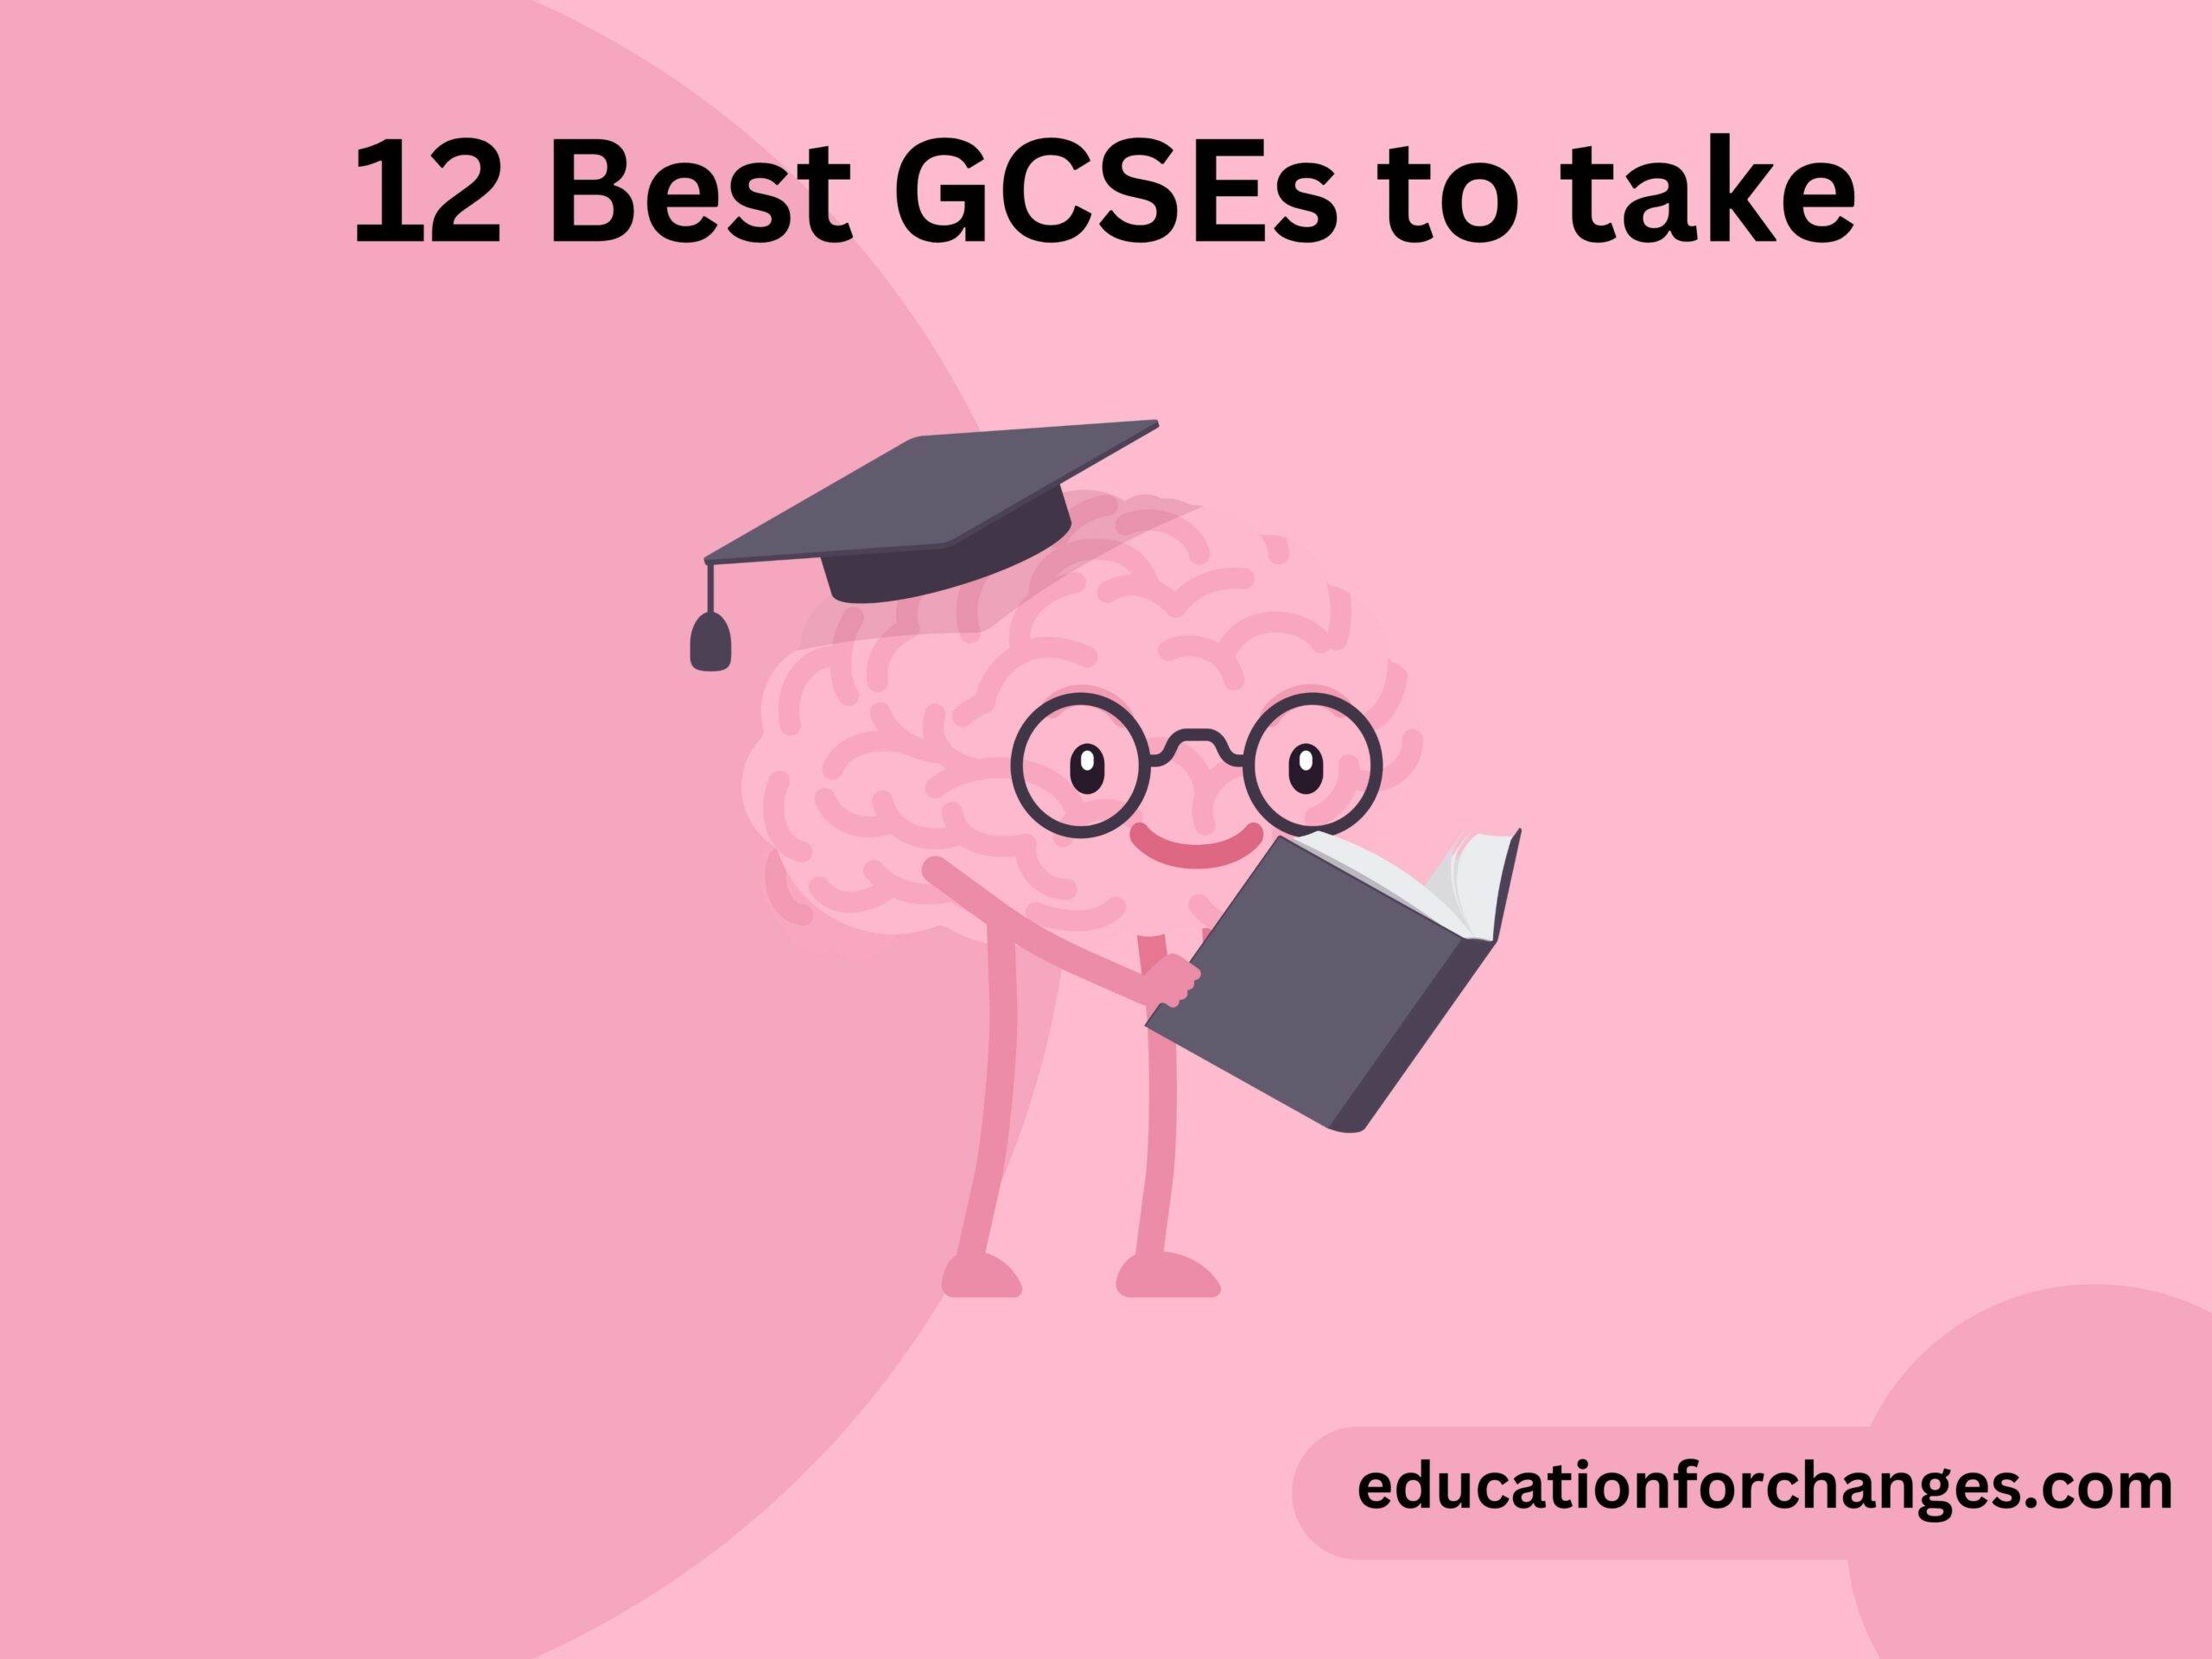 12 Best GCSEs to take